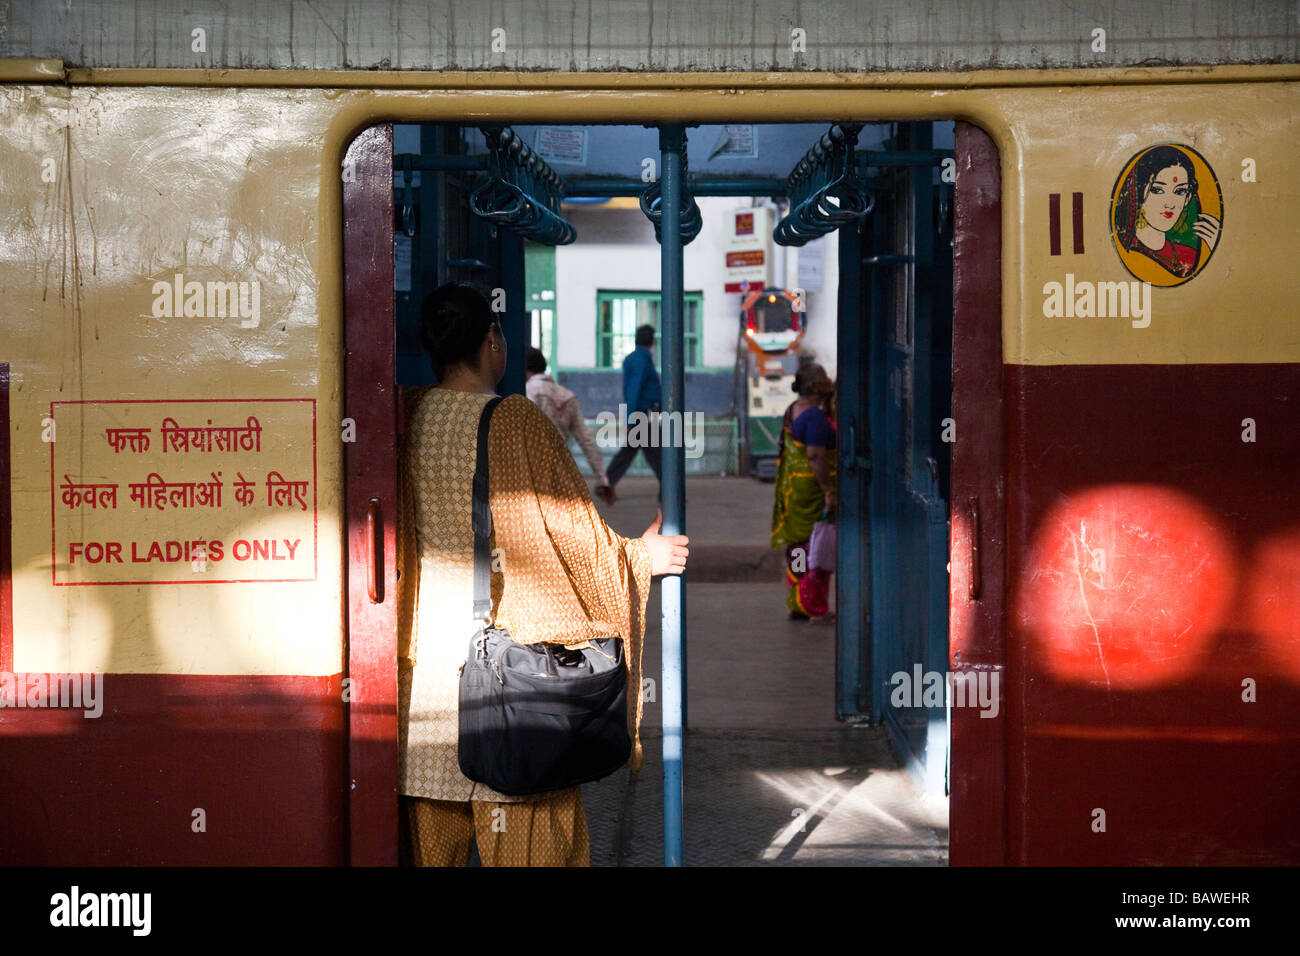 Ladies Only Car on a Train in Victoria Terminus in Mumbai India Stock Photo